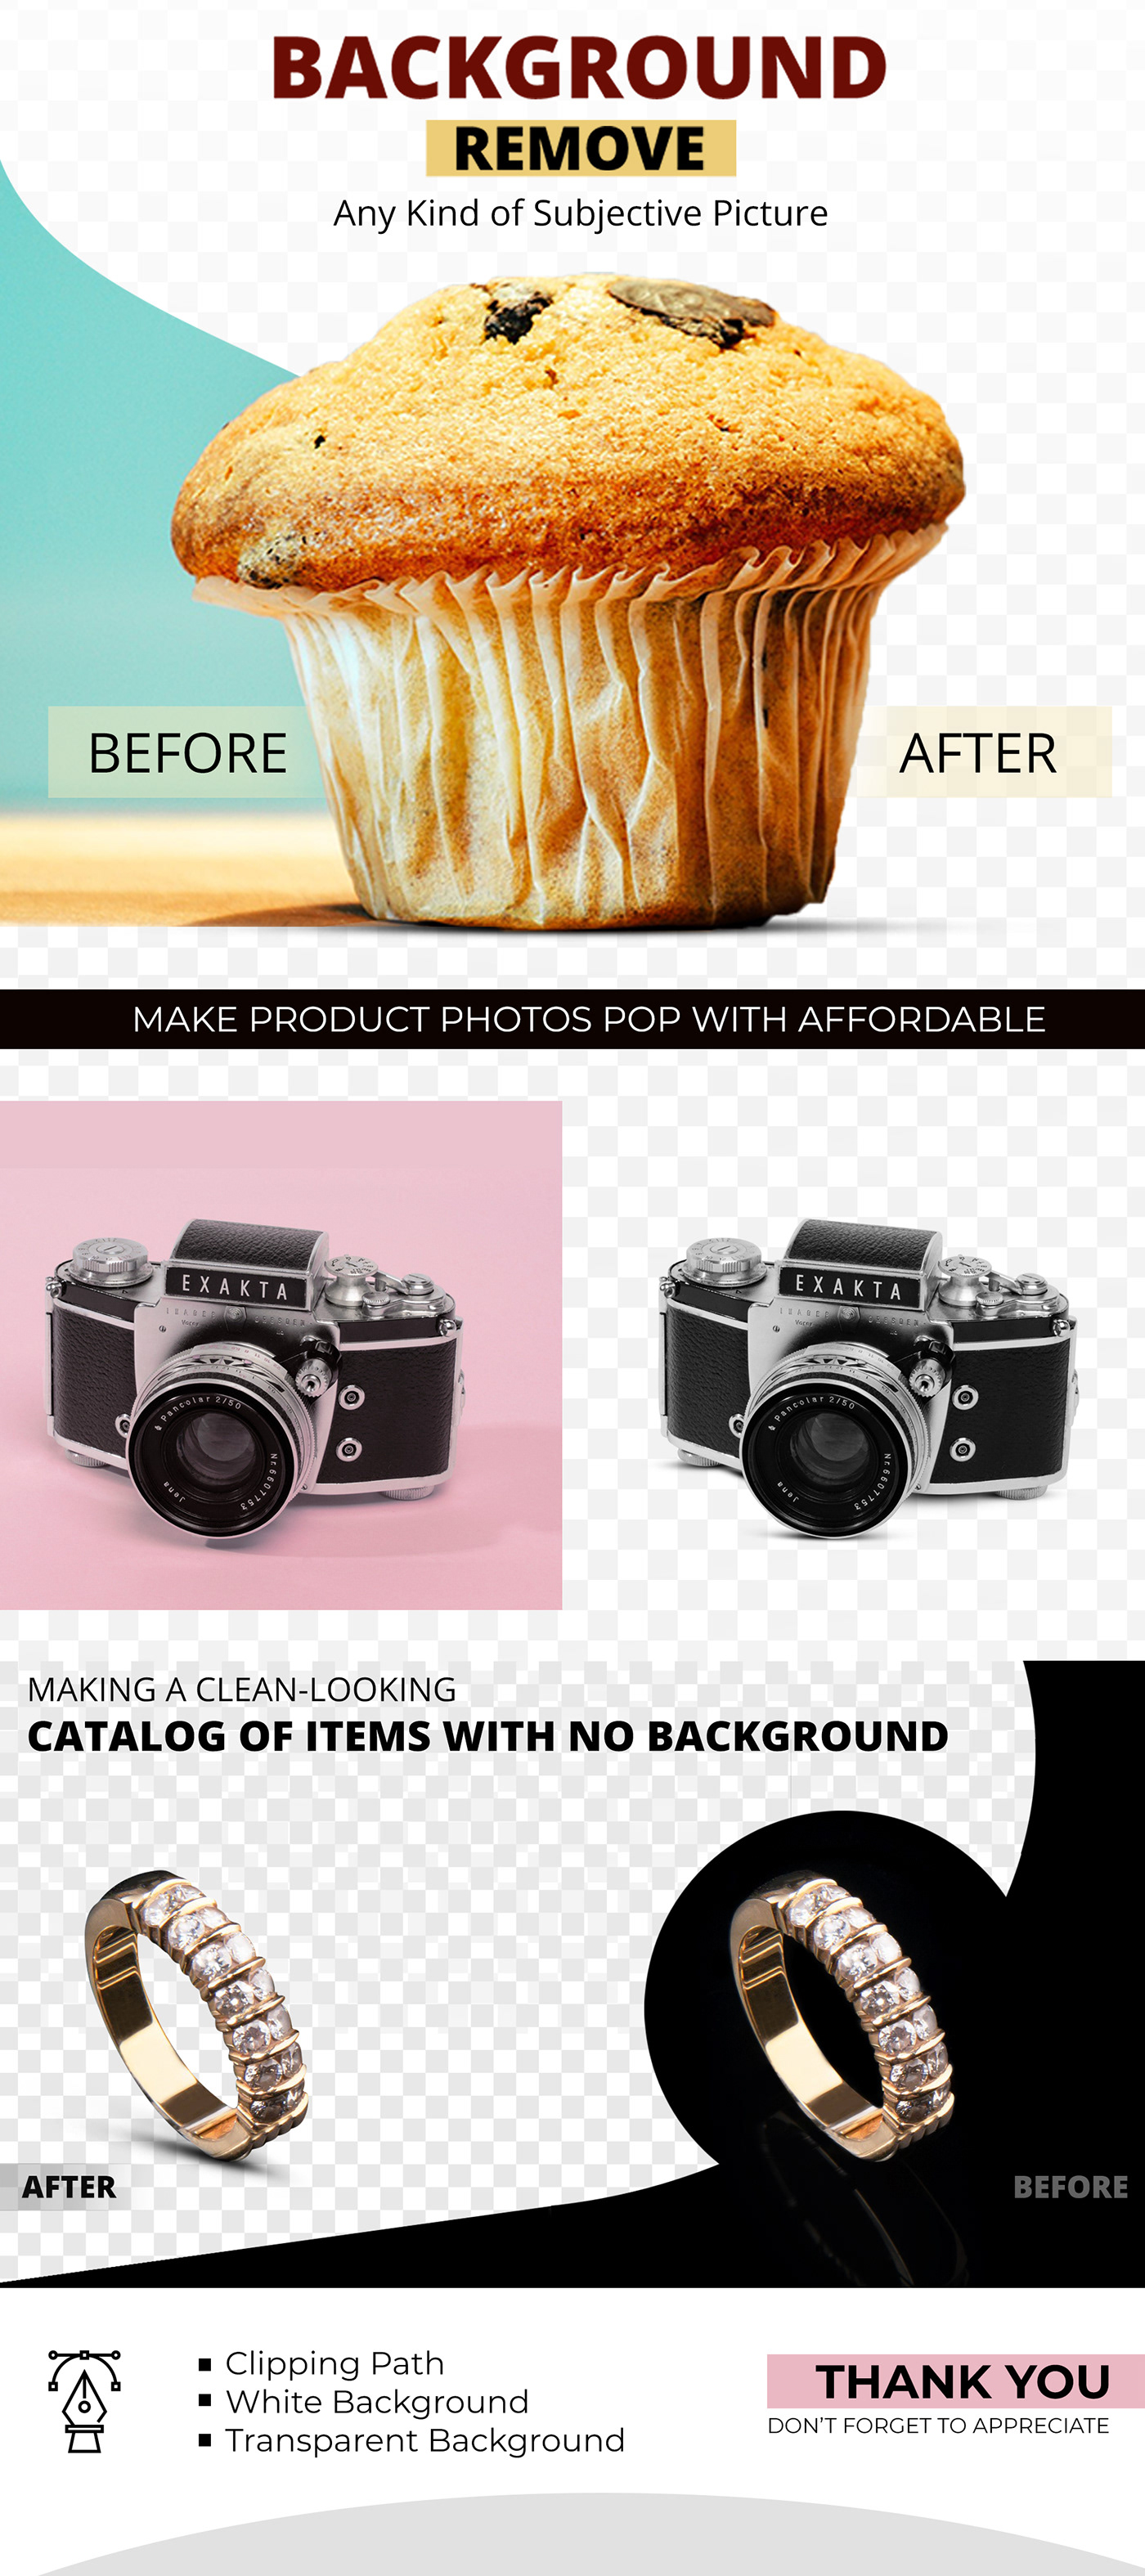 ads Amazon background Background Remove branding  Clippingpath e-commerce product transparent background white background